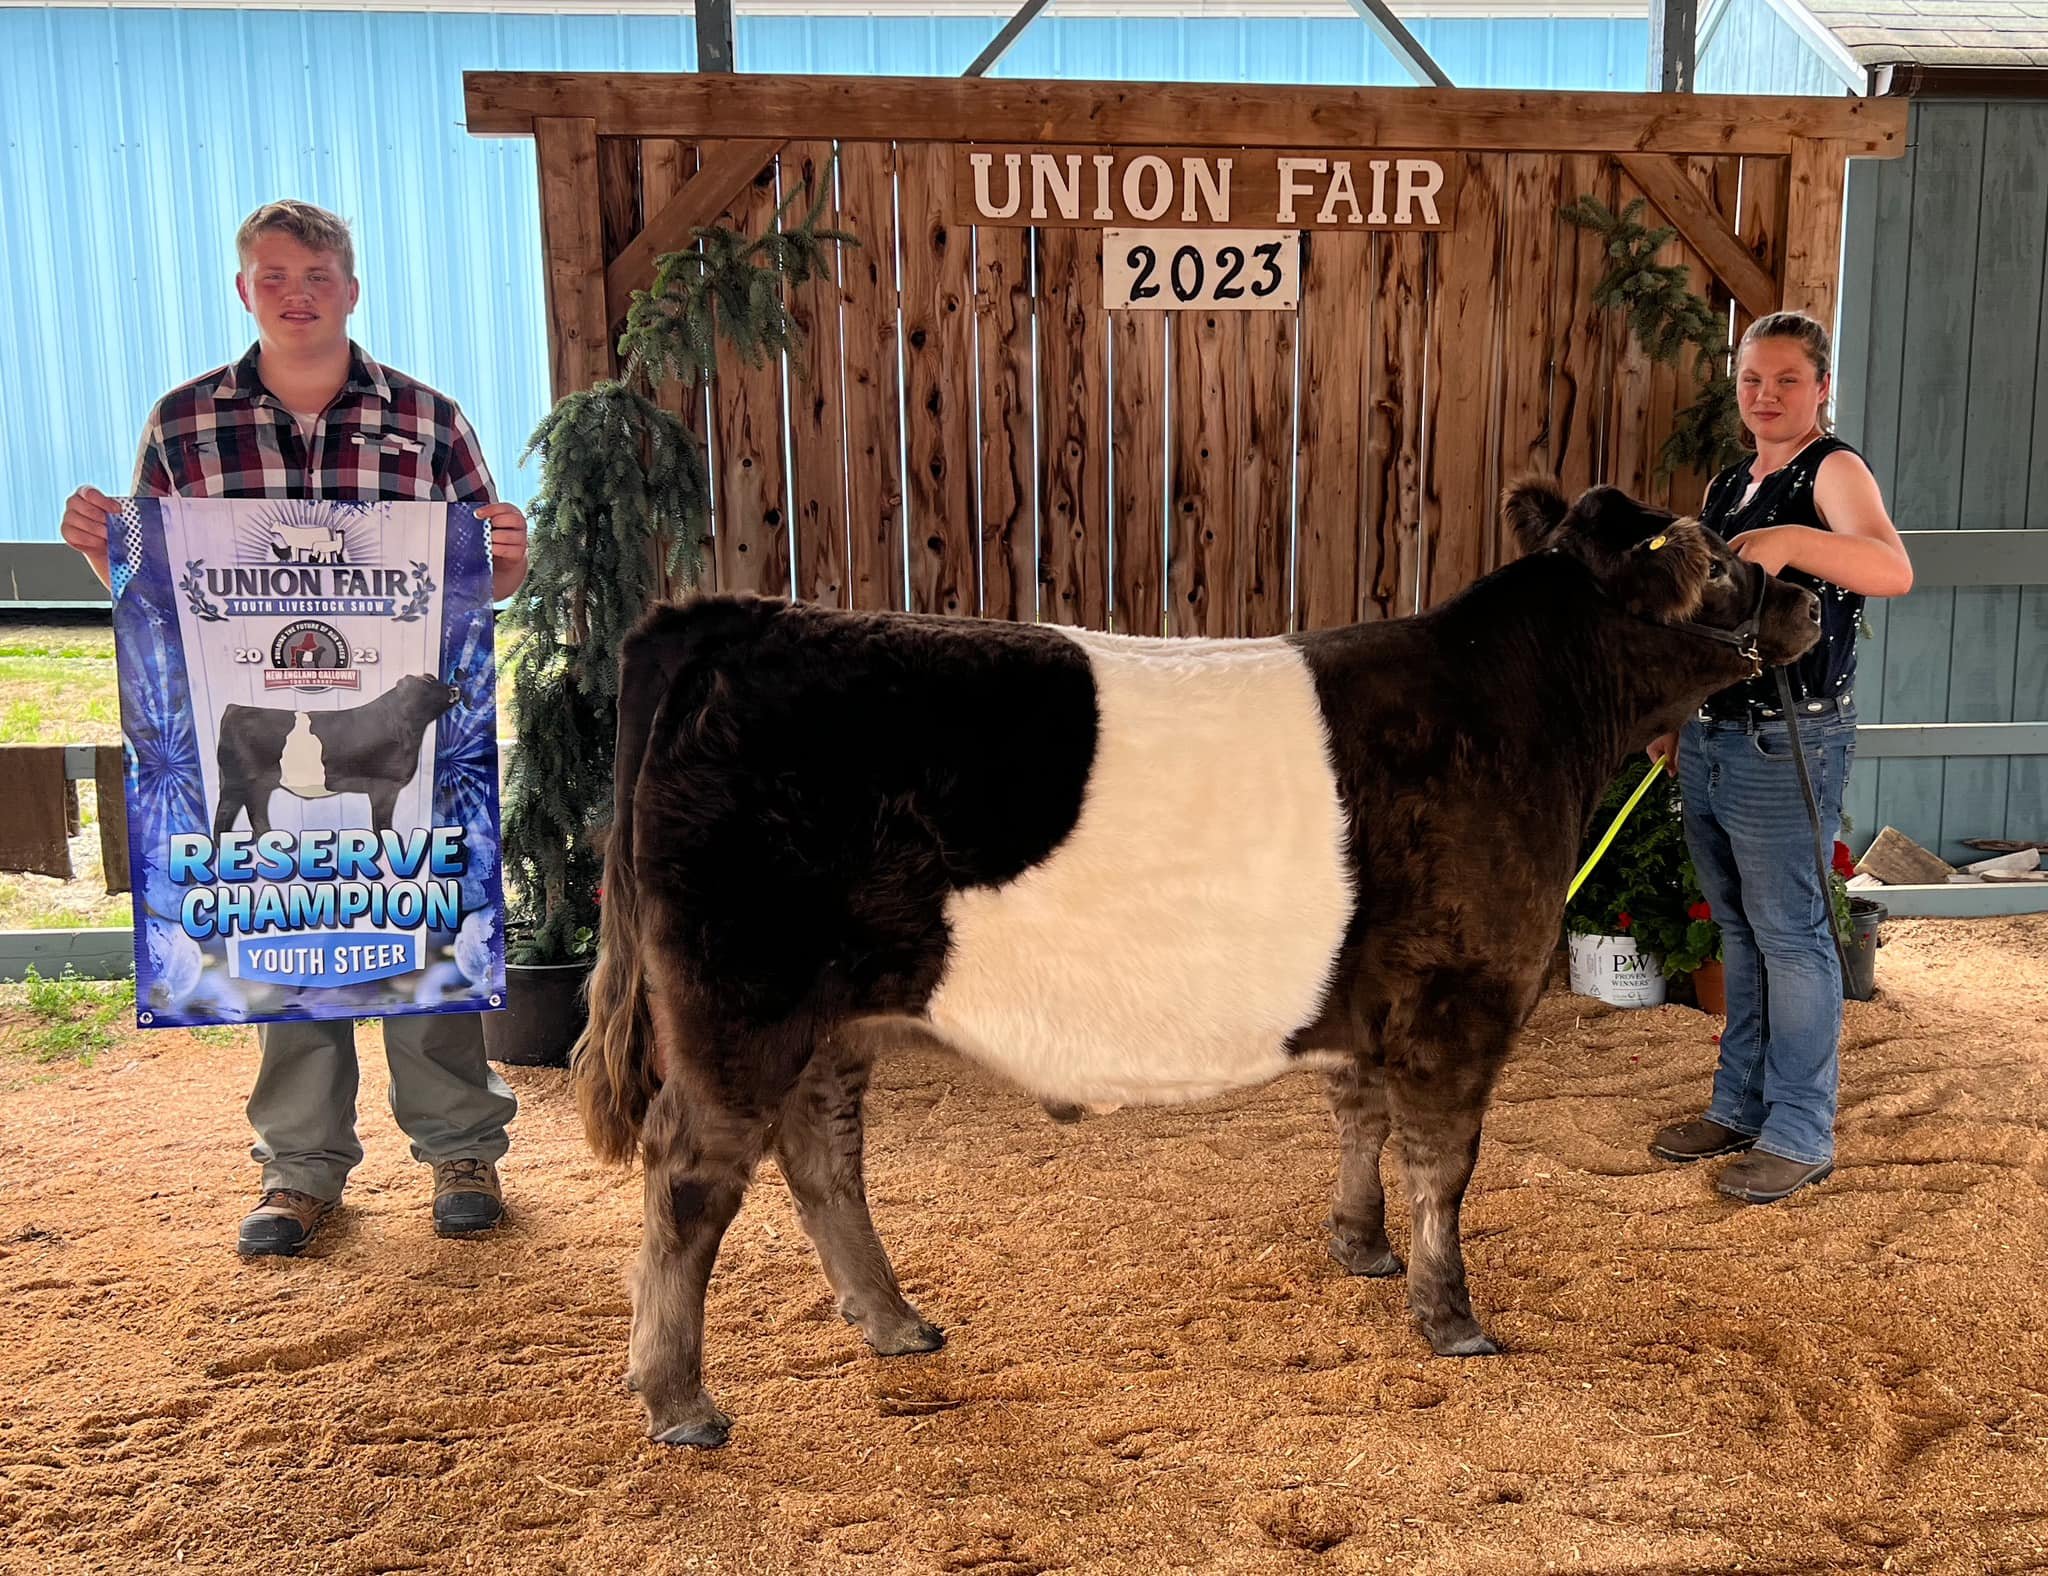 Reserve Champion Youth Steer